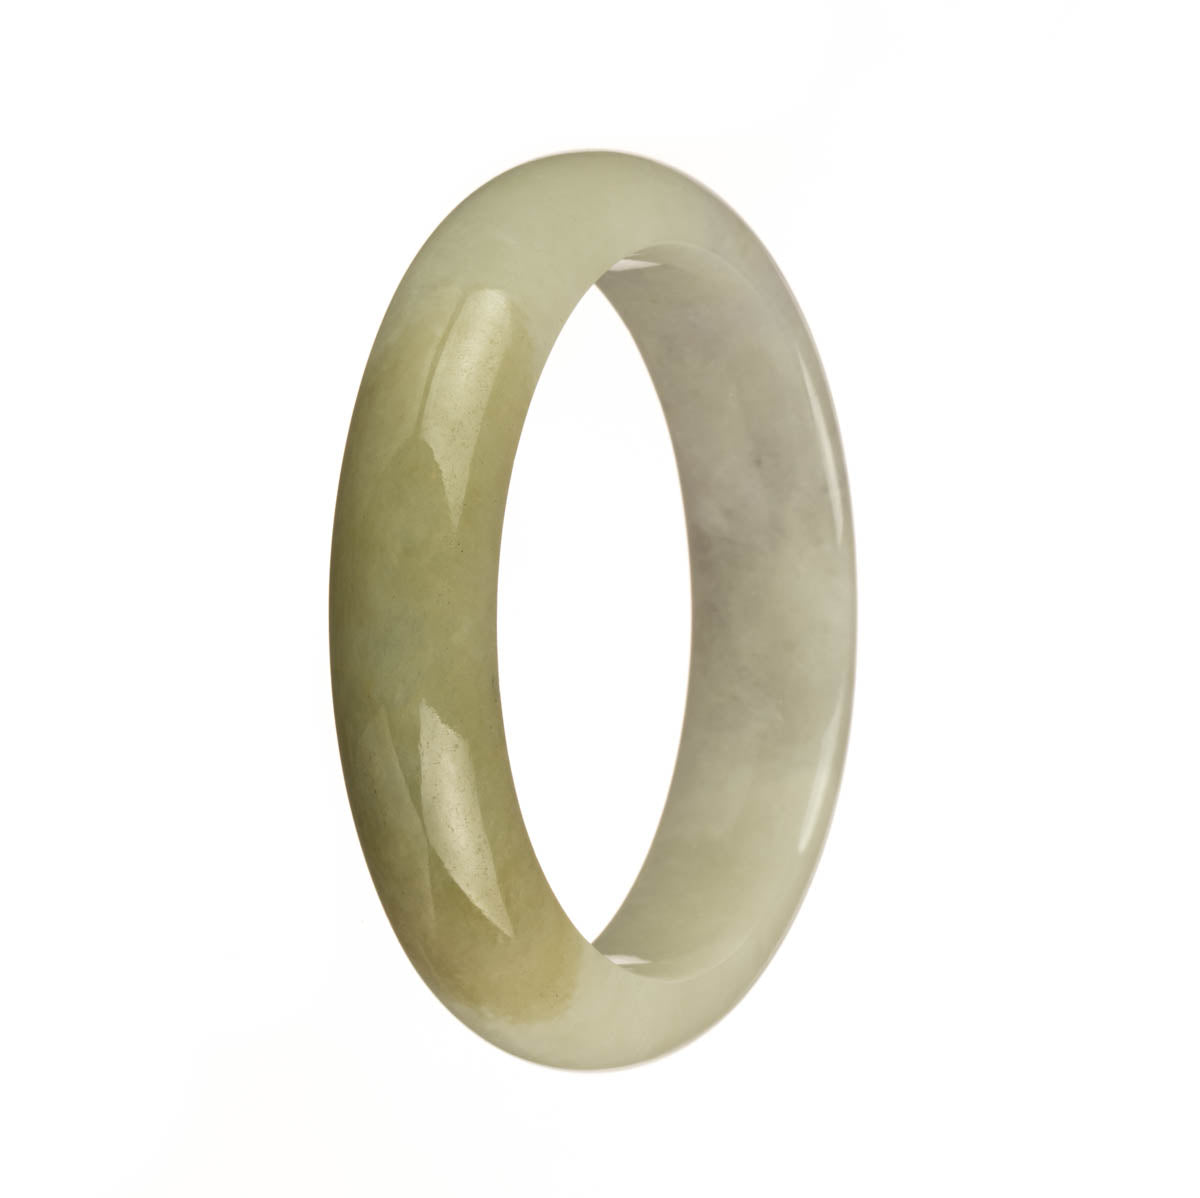 A close-up photo of a genuine grade A white and olive green jadeite jade bangle. The bangle is shaped like a half moon and measures 57mm in diameter. It is a beautiful piece of jewelry from the MAYS brand.